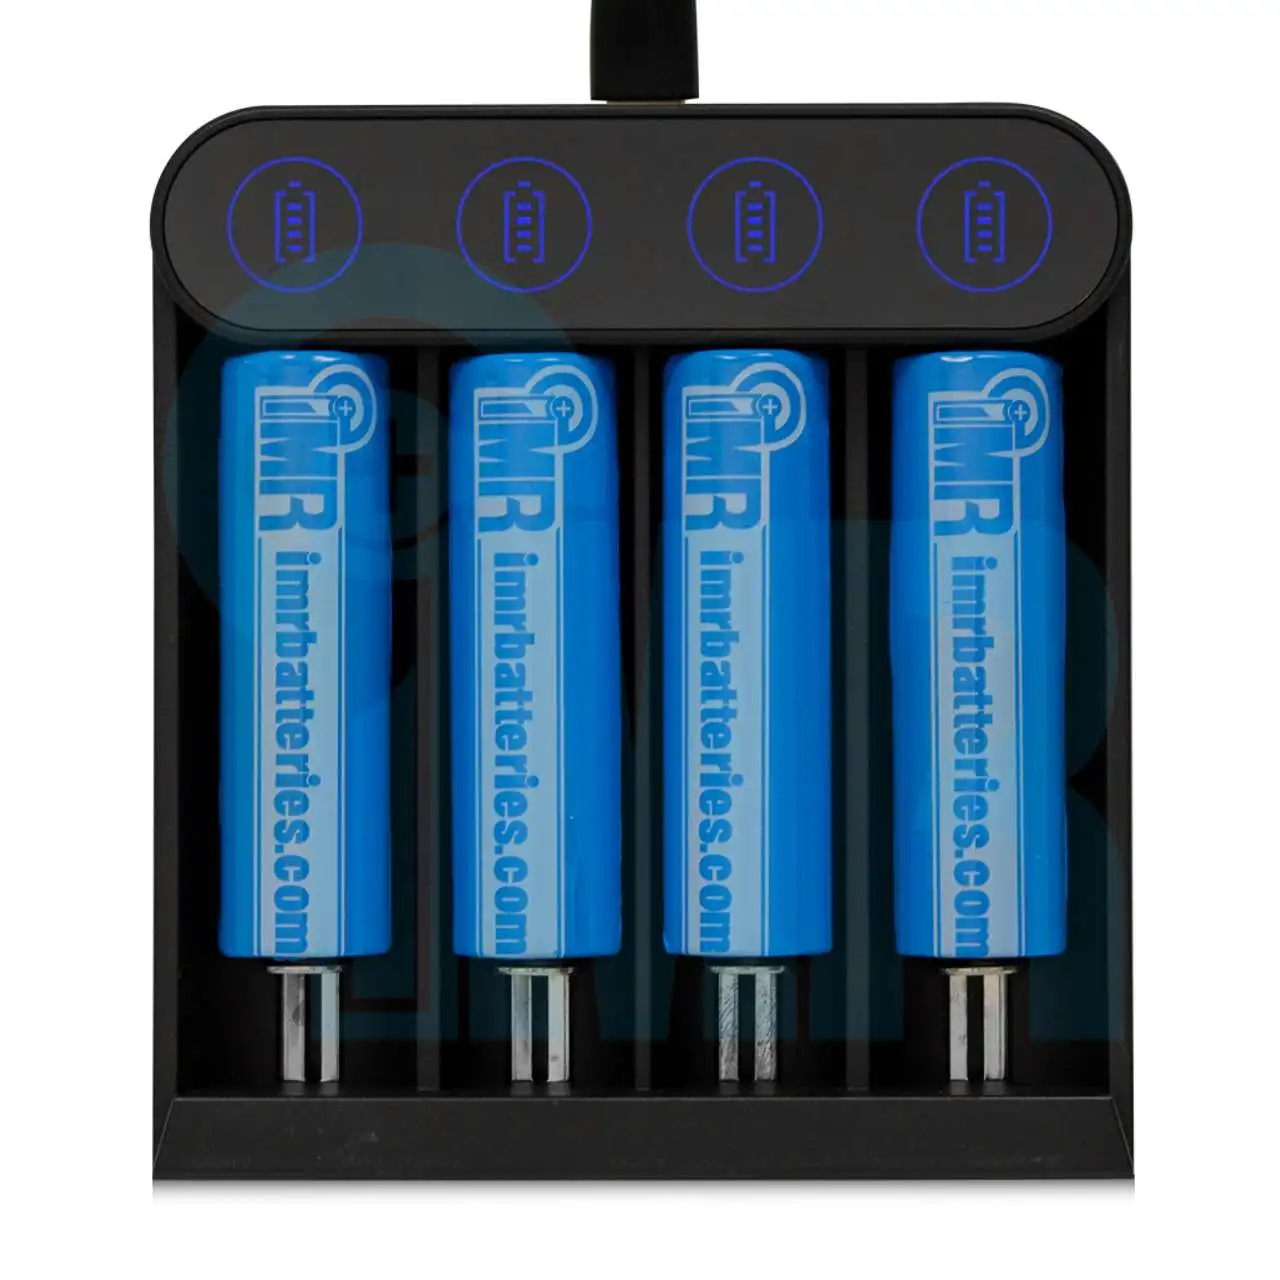 Discover Premium Vape Chargers – the powerhouse of your vapes